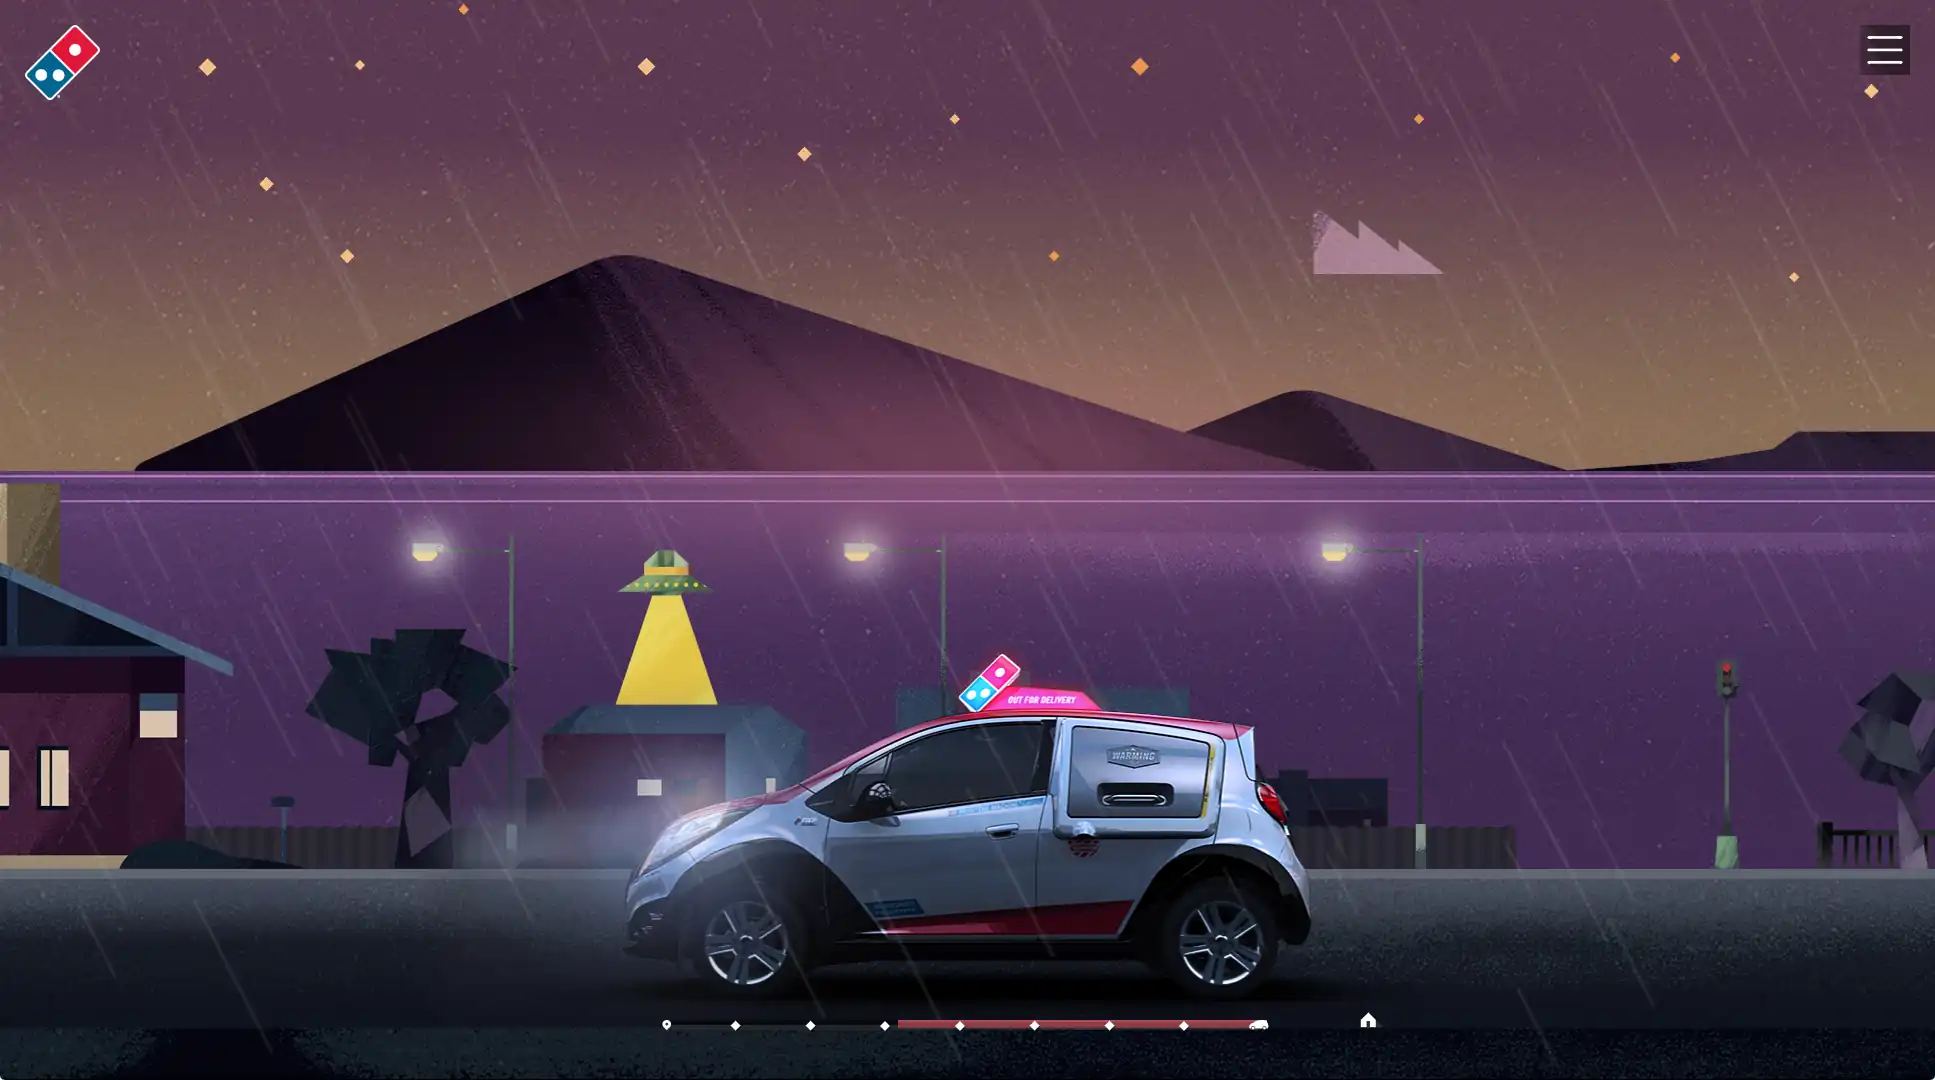 Domino’s DXP driving in the rain with spaceship in background